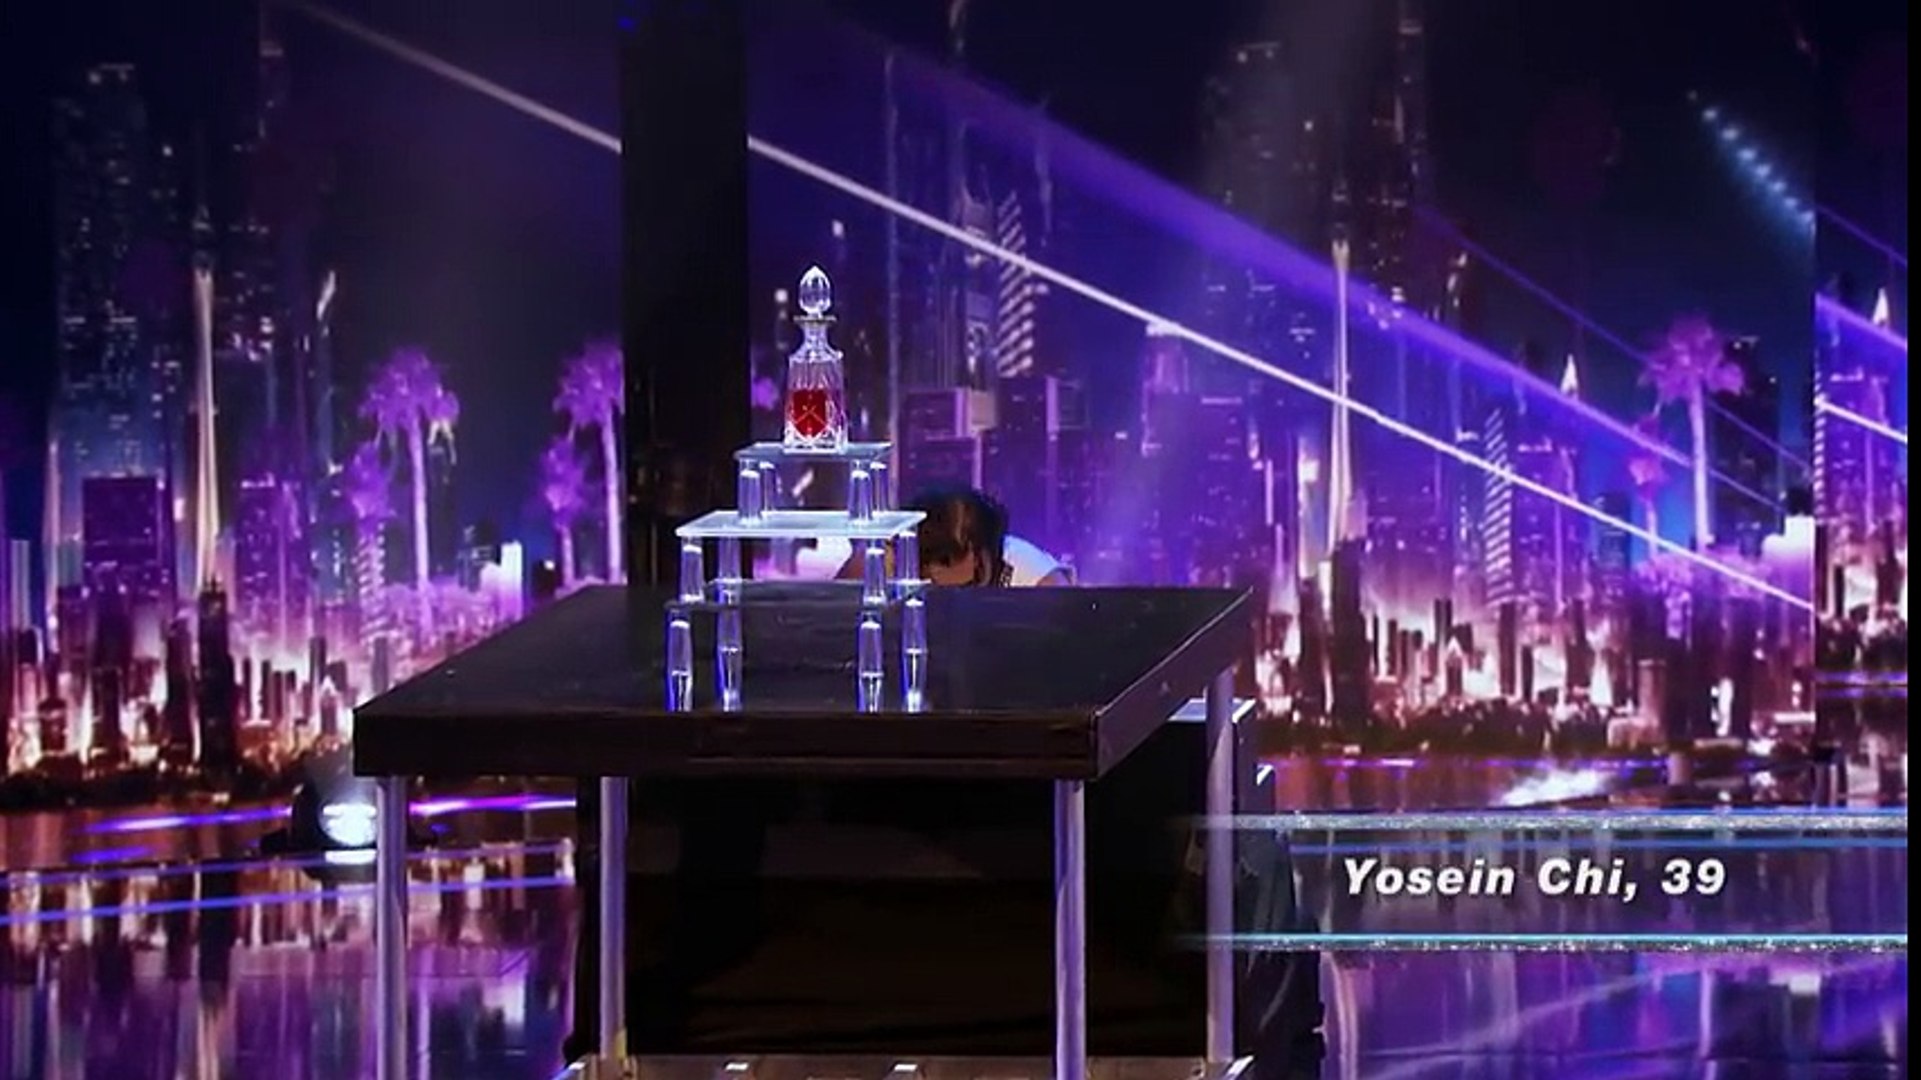 Yosein Chi- Acrobat Performs Dangerous Routine Surrounded by Daggers - America's Got Talent 201